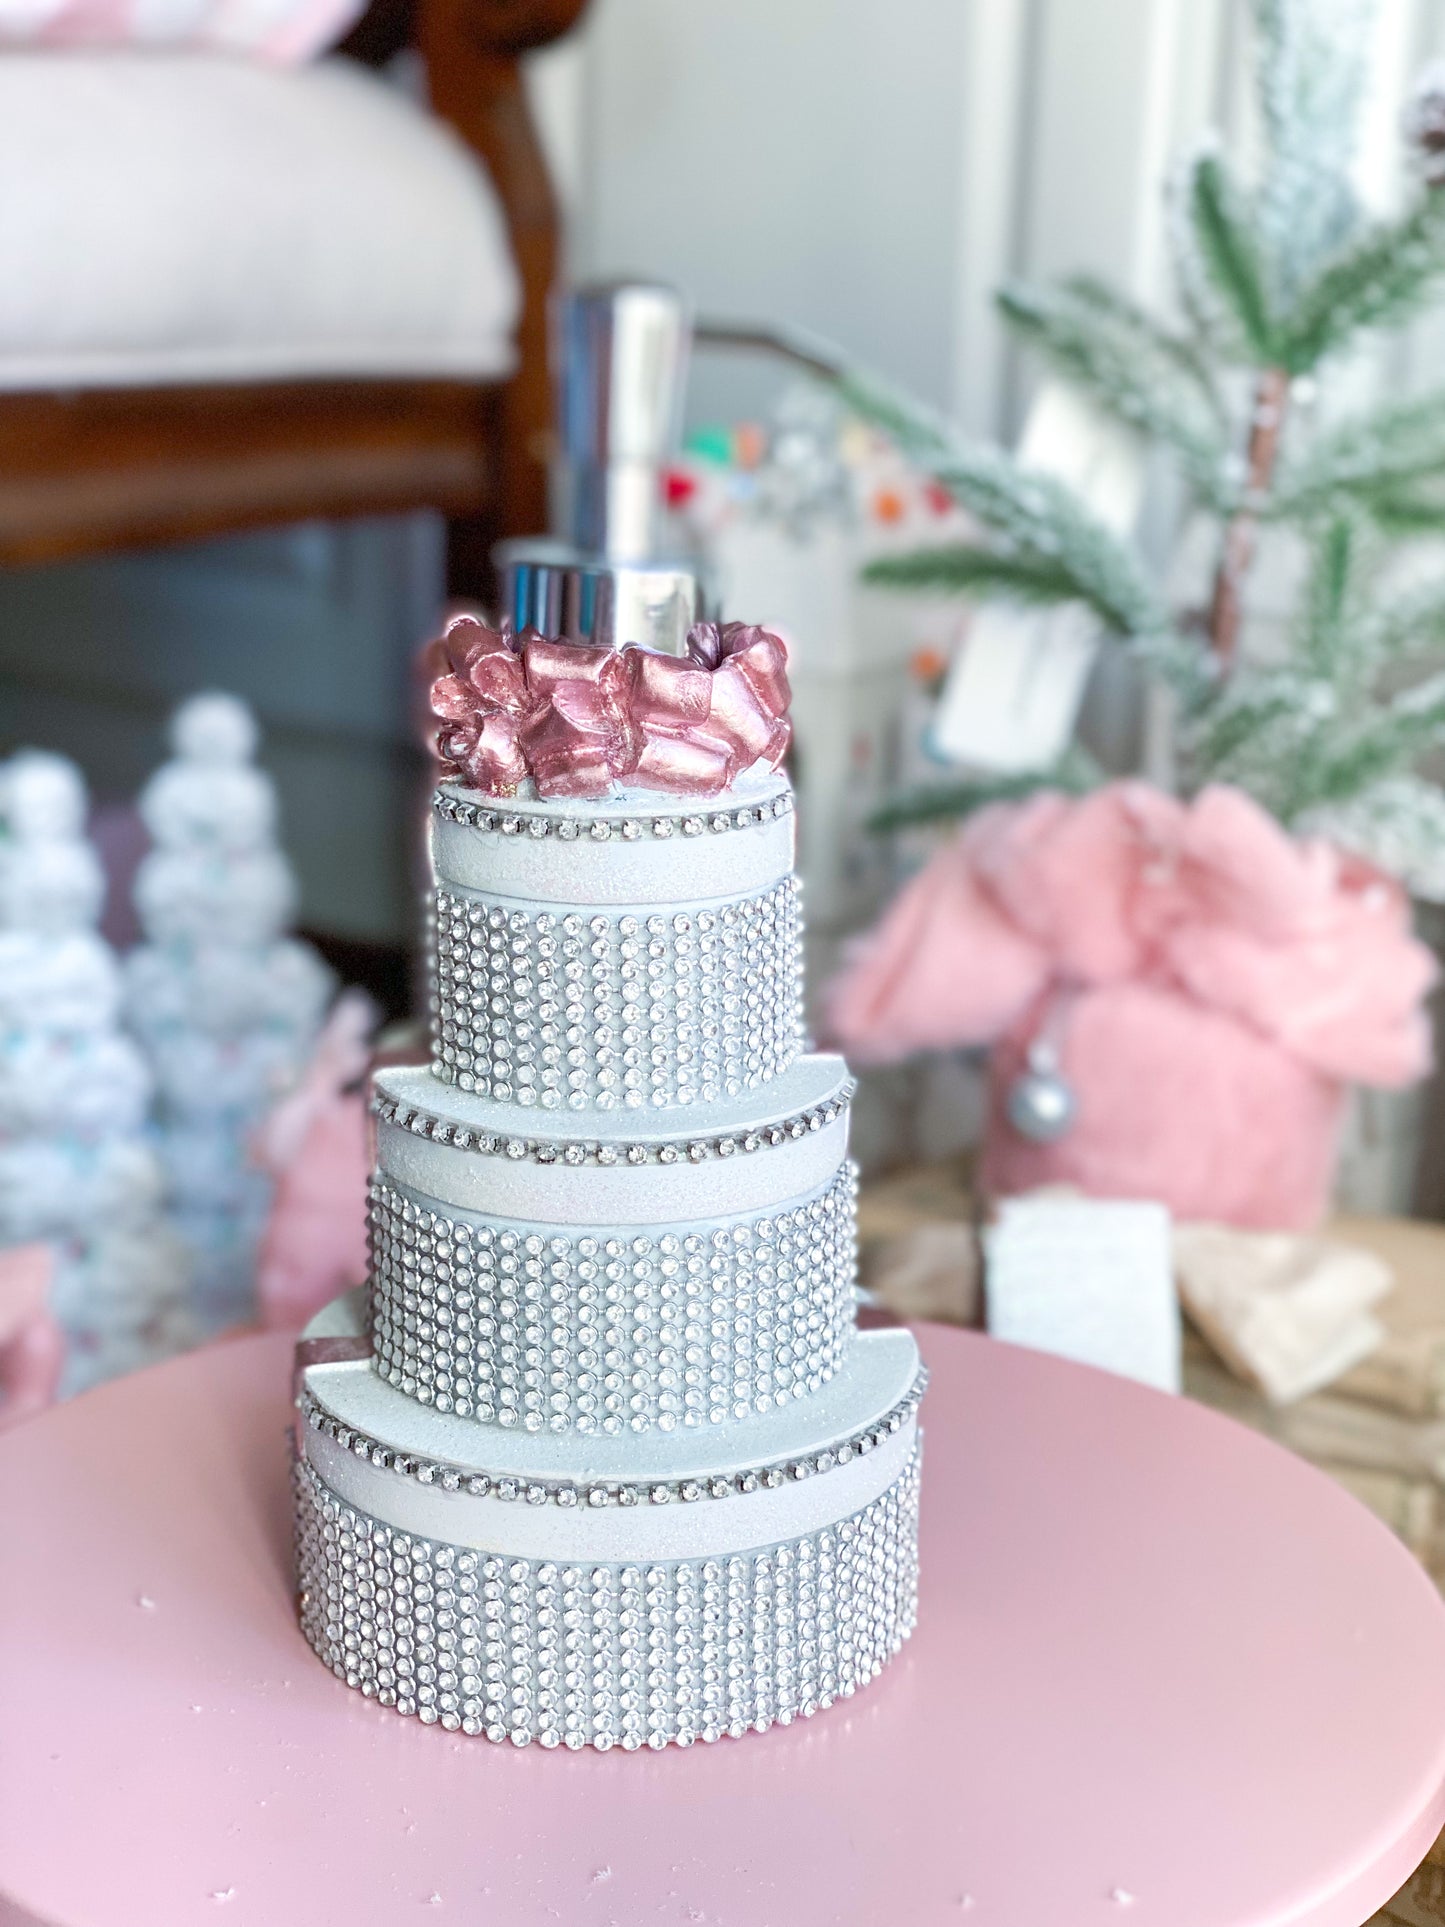 Three Tier Bandbox Jeweled Soap Dispenser with Pink Bow